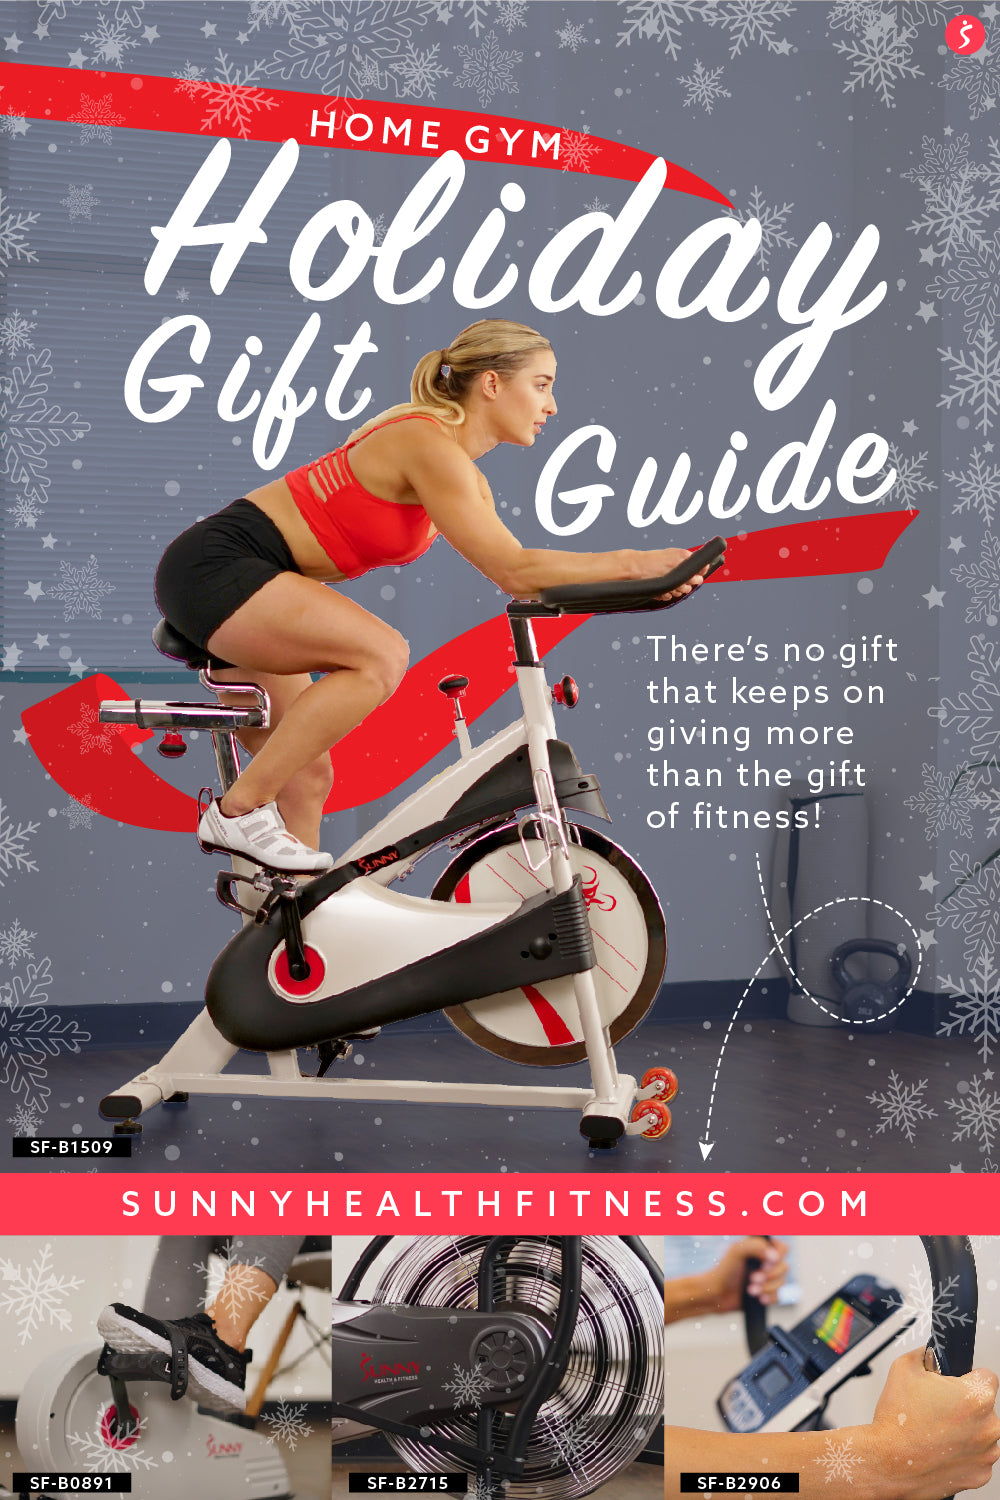 Home Gym Holiday Gift Guide Infographic